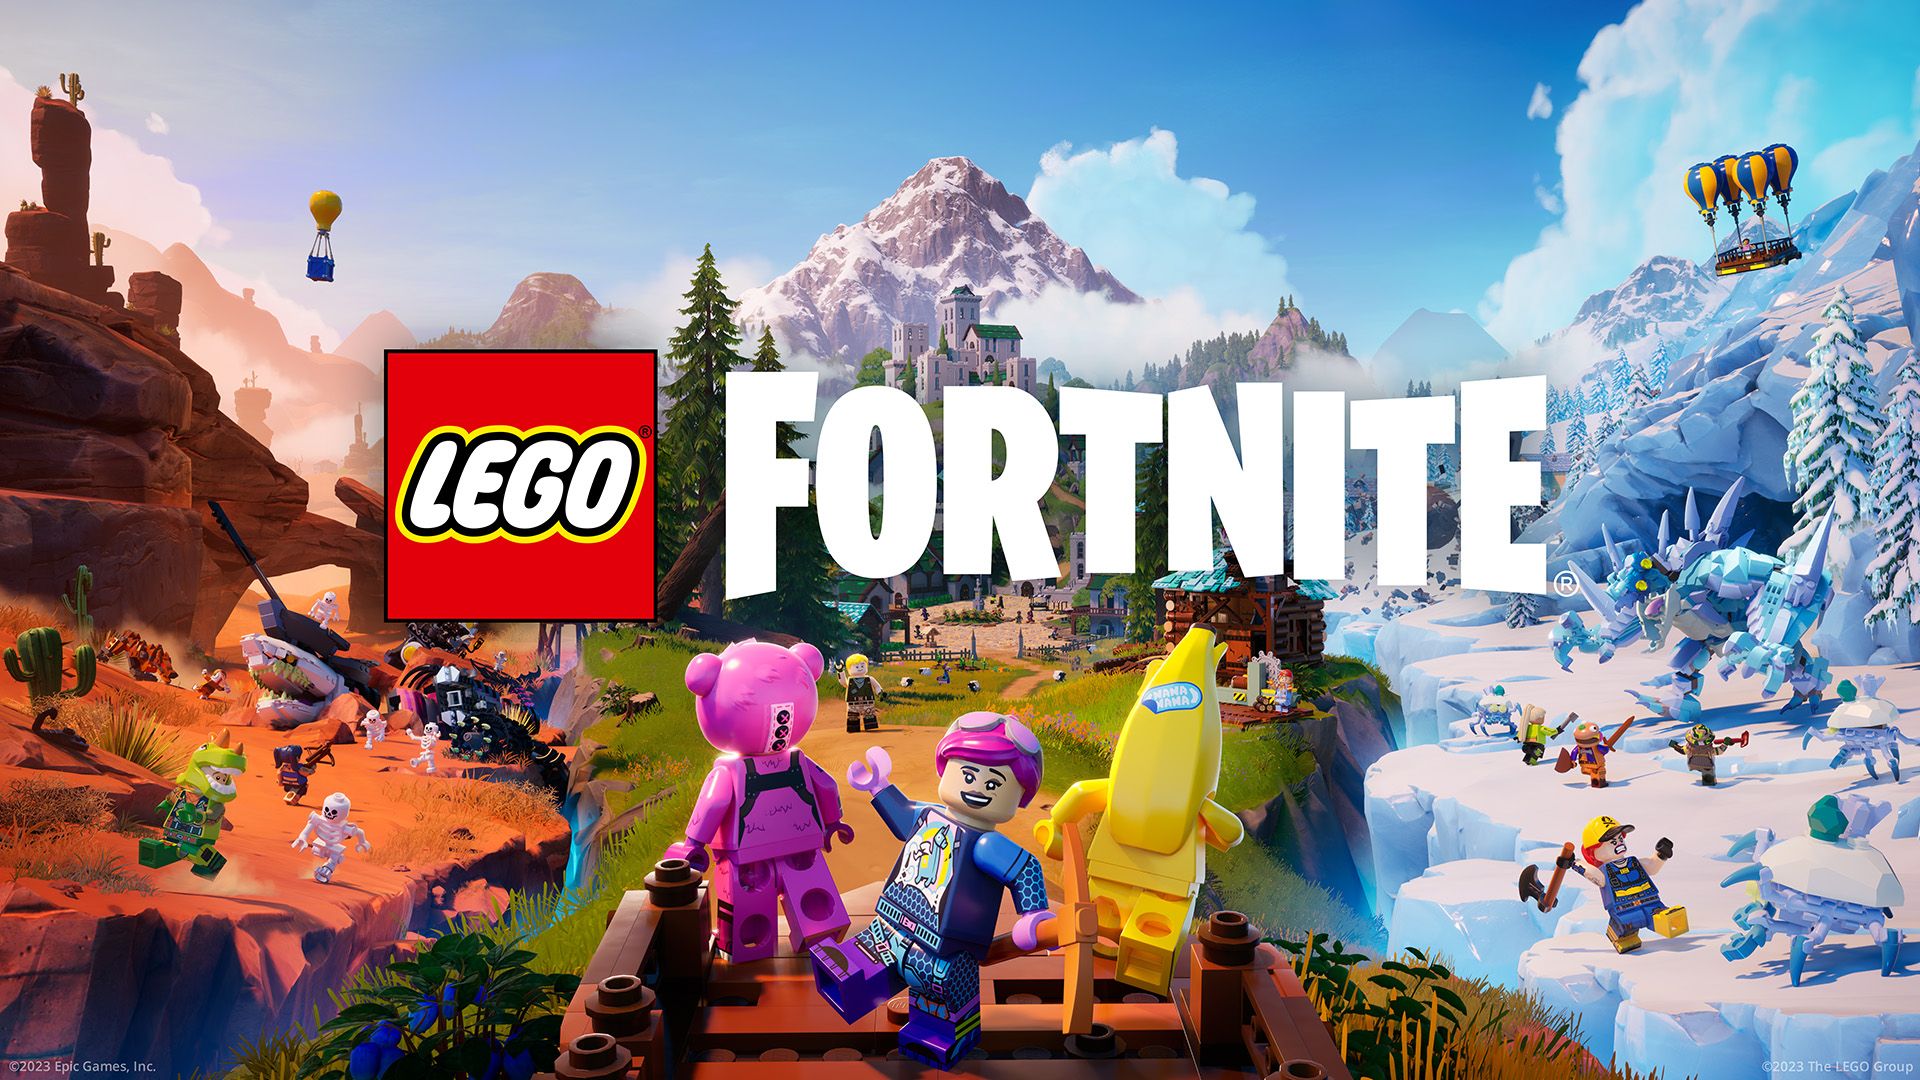 The Lego Fortnite key artwork showing three characters against a backdrop image split of the three different biomes.